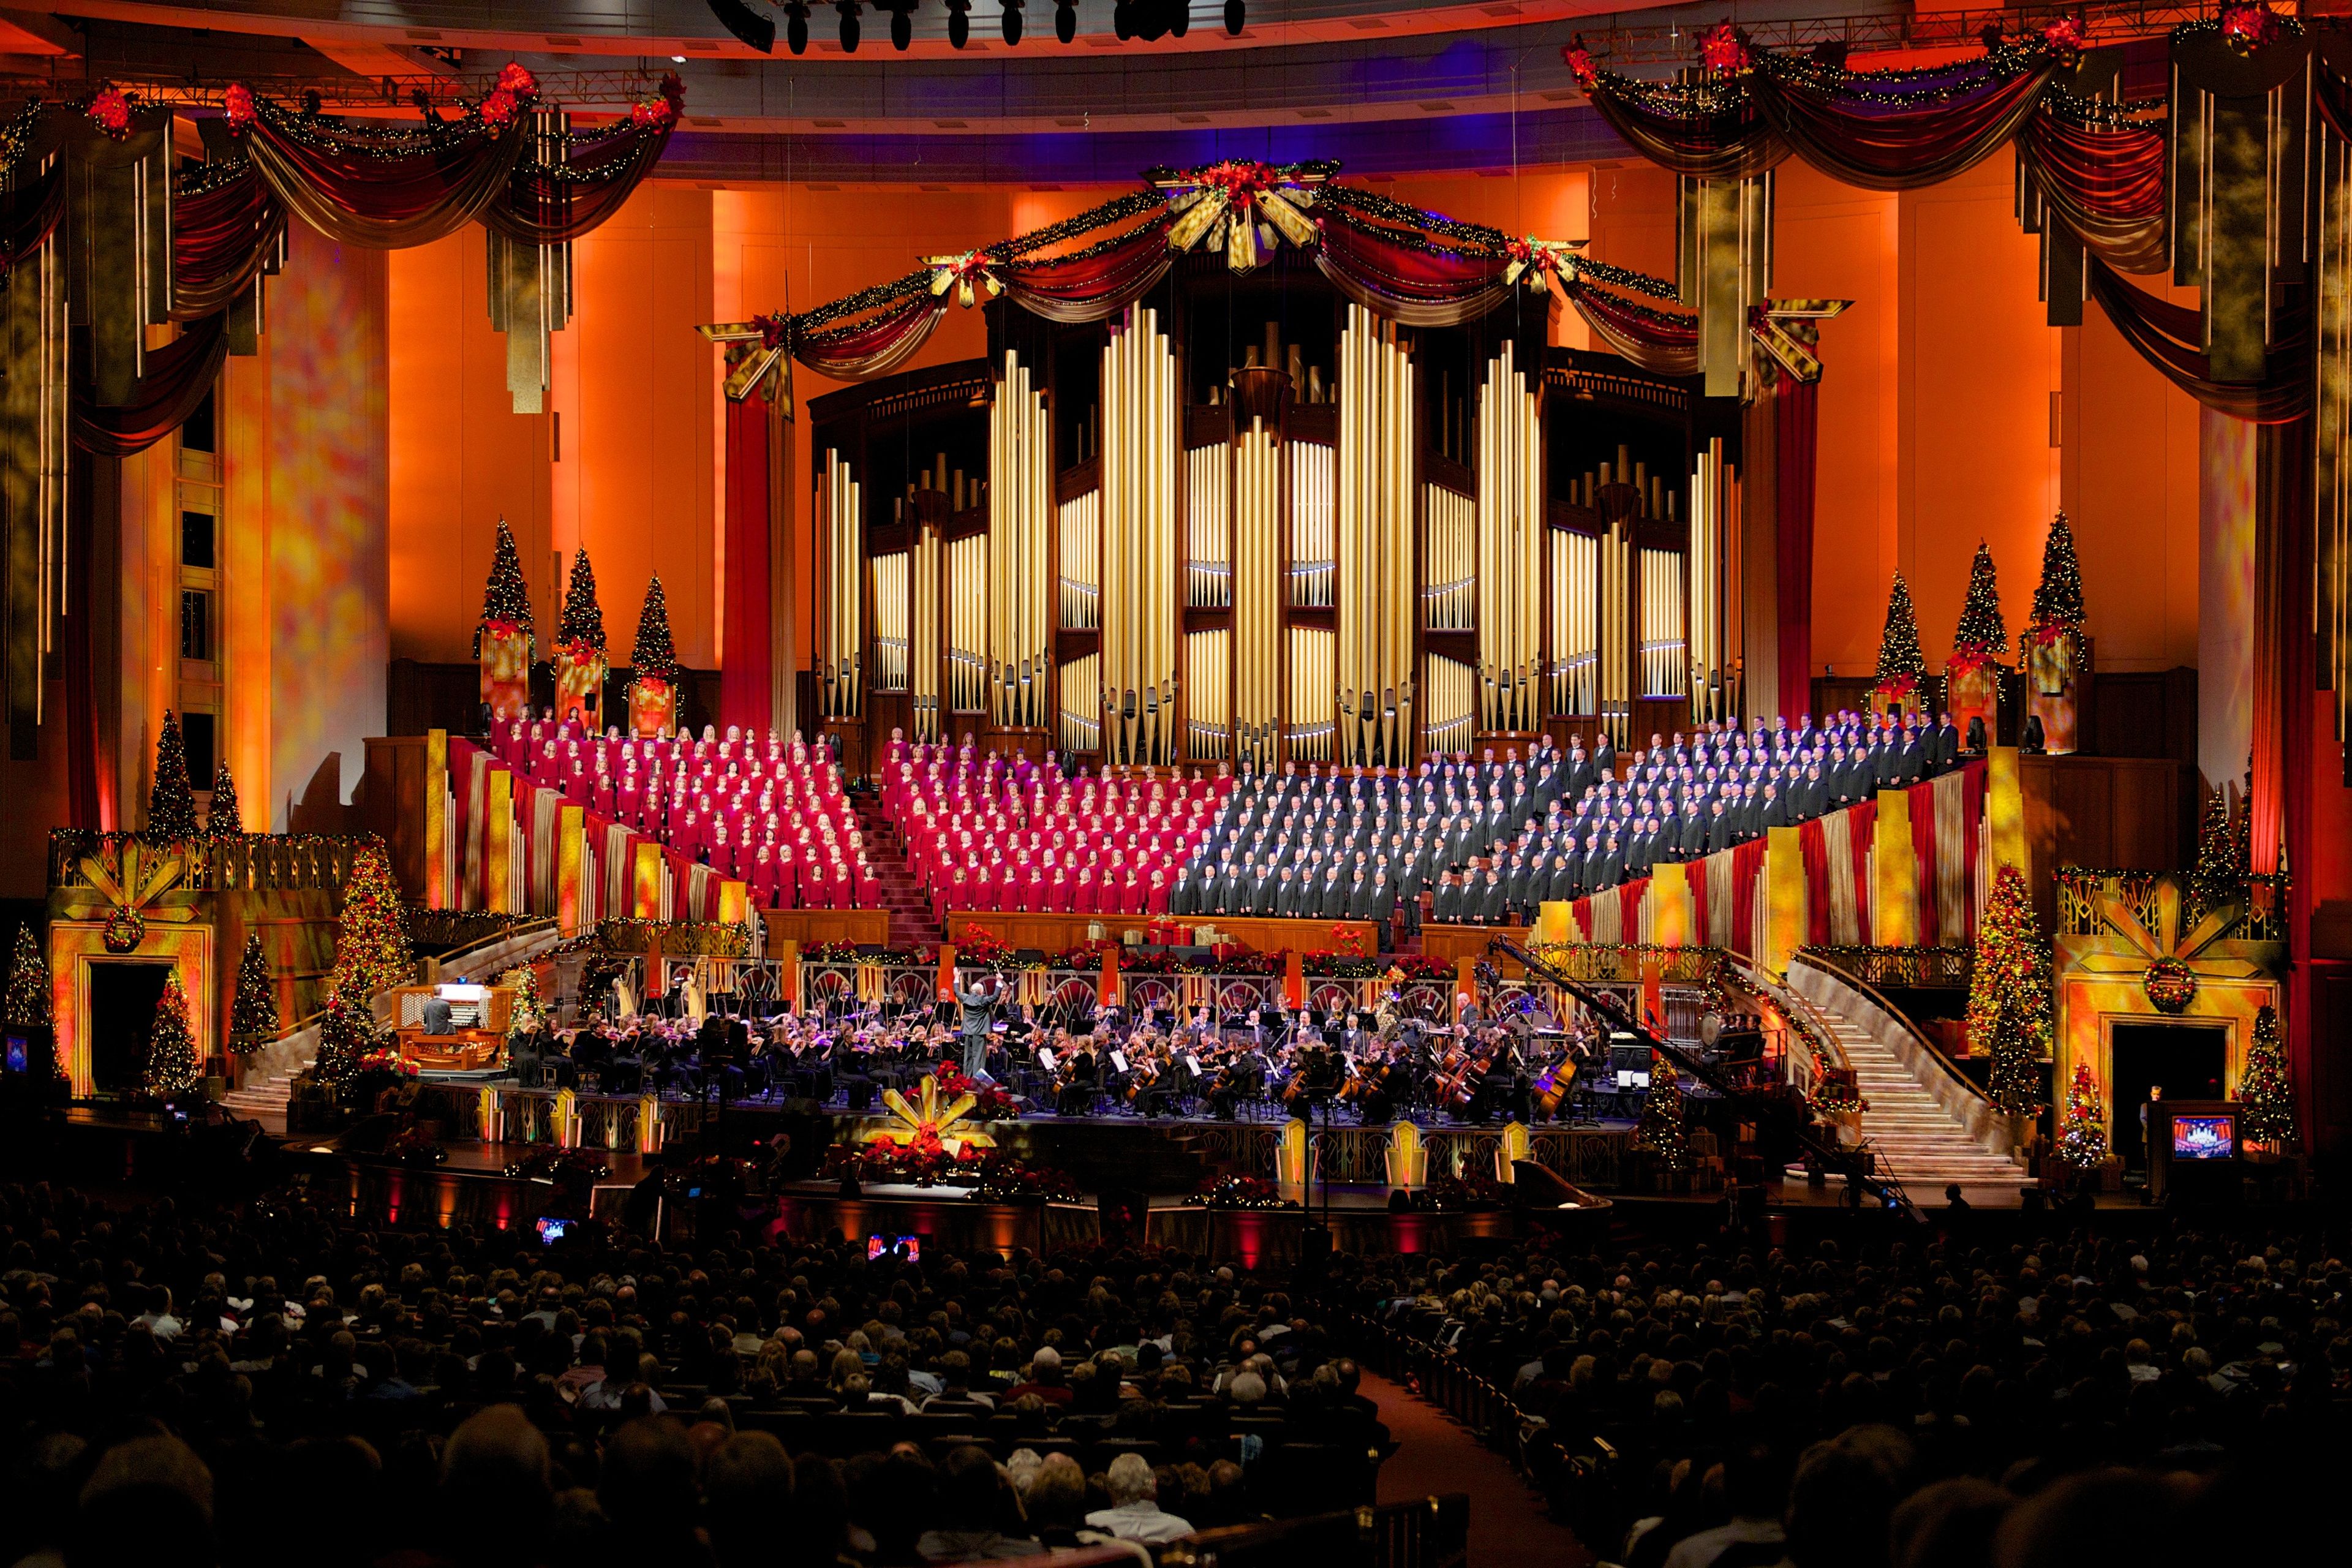 The Mormon Tabernacle Choir and orchestra performing in the 2012 Christmas concert.